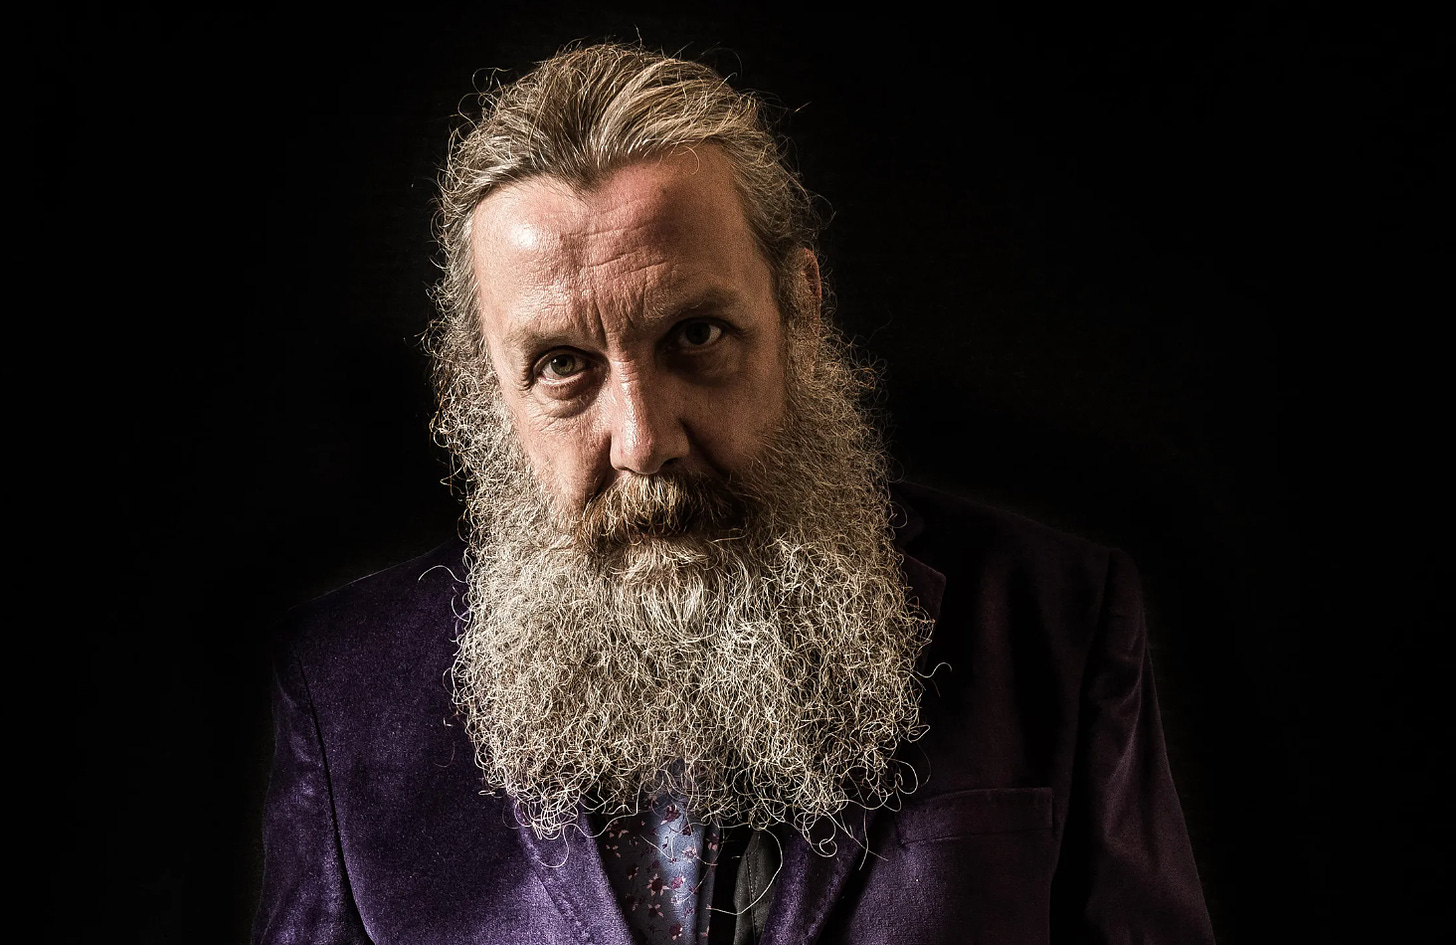 Alan Moore with his giant white beard and intense stare